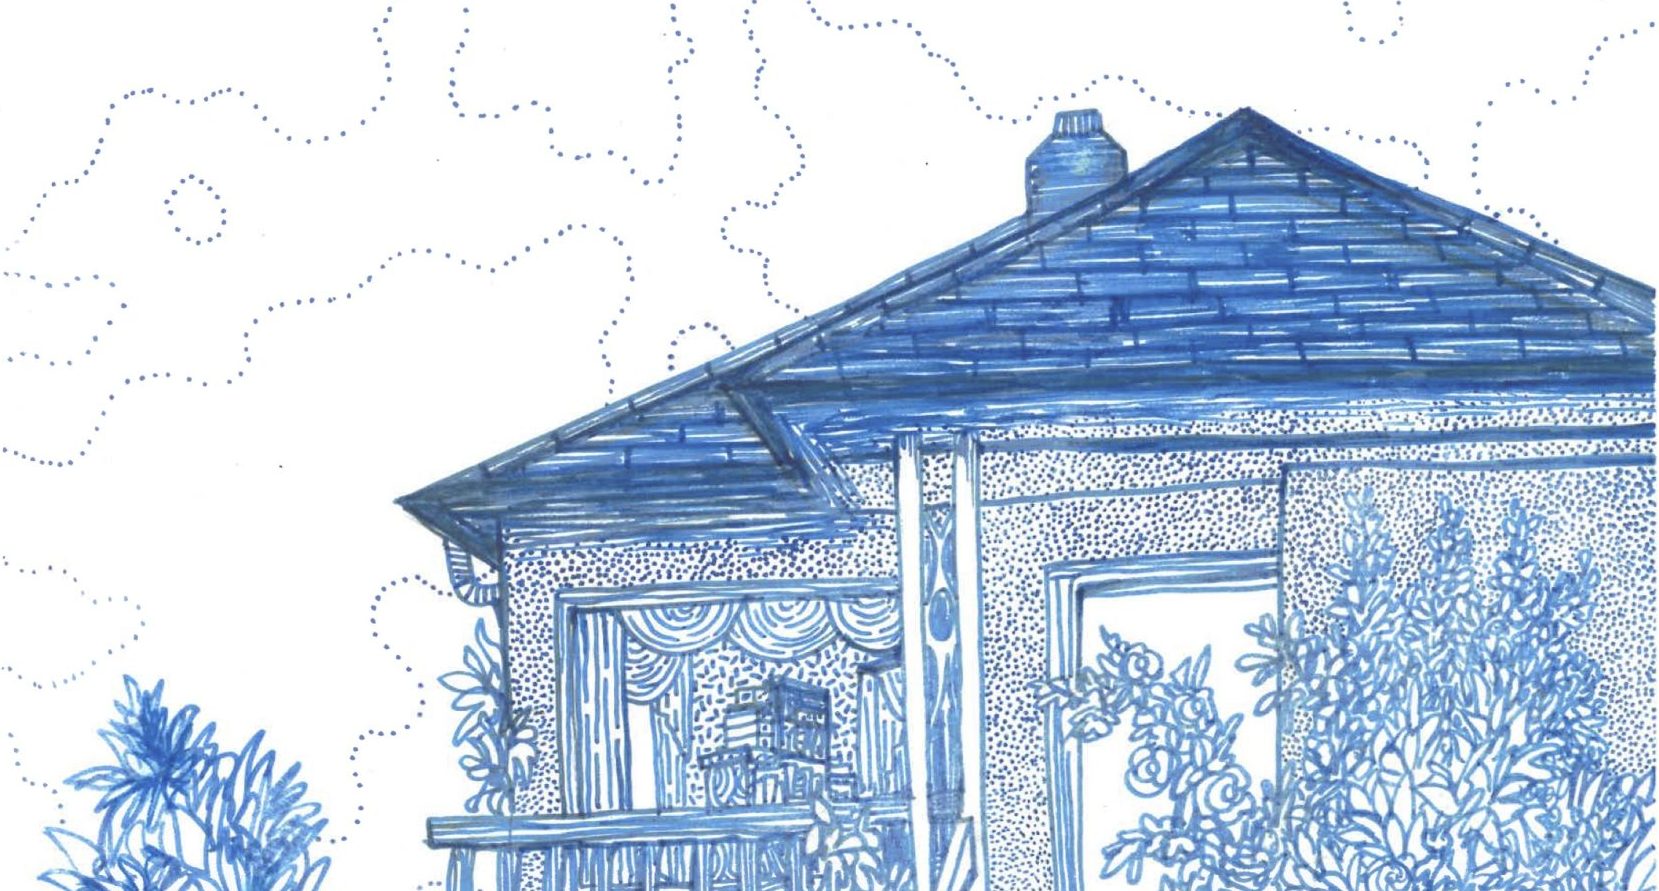 a close up of page 9 of renoviction, showing the house from the front and the sky behind it.